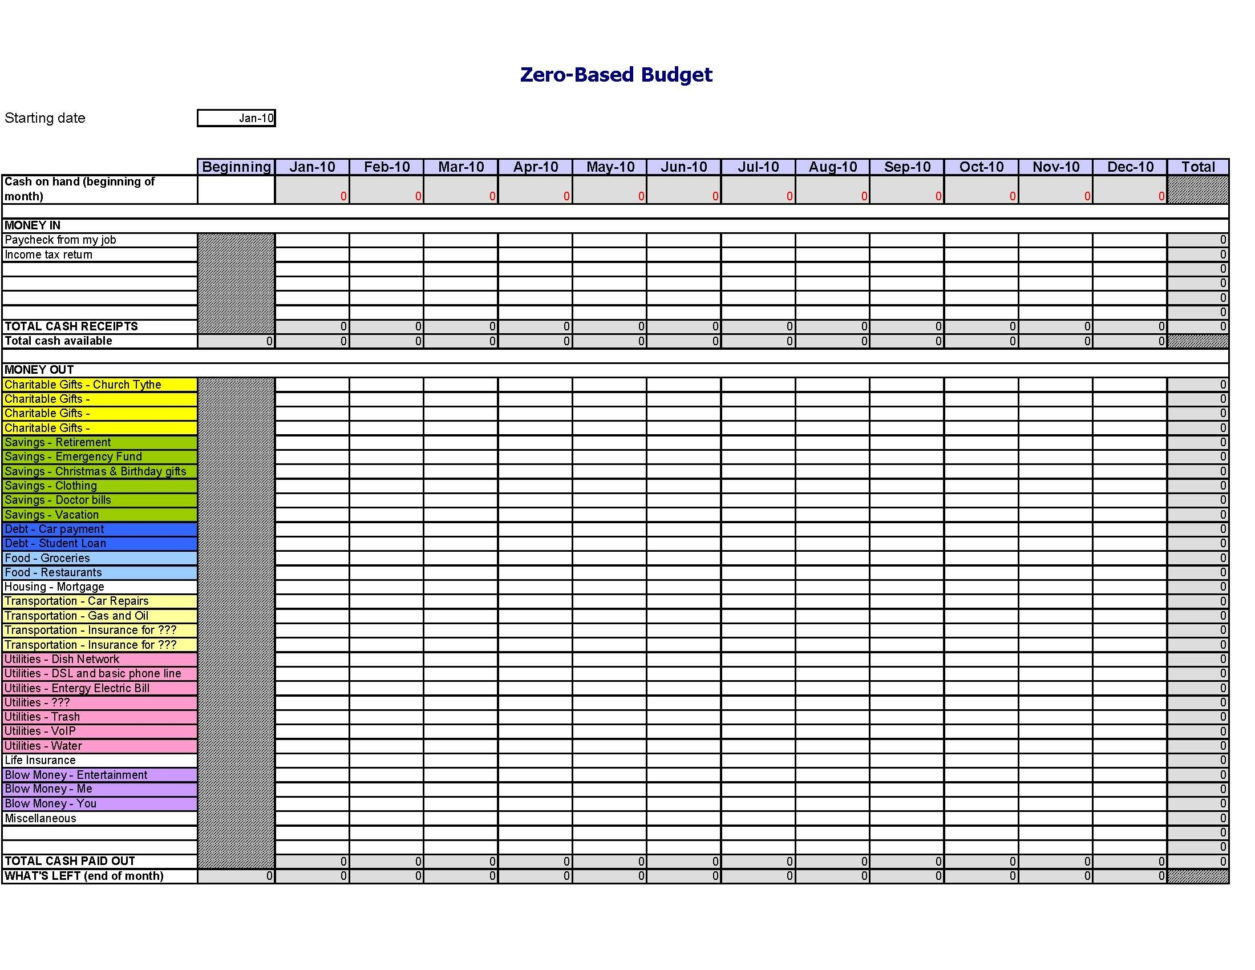  A spreadsheet with various expense categories and columns for each month of the year to track financial management.